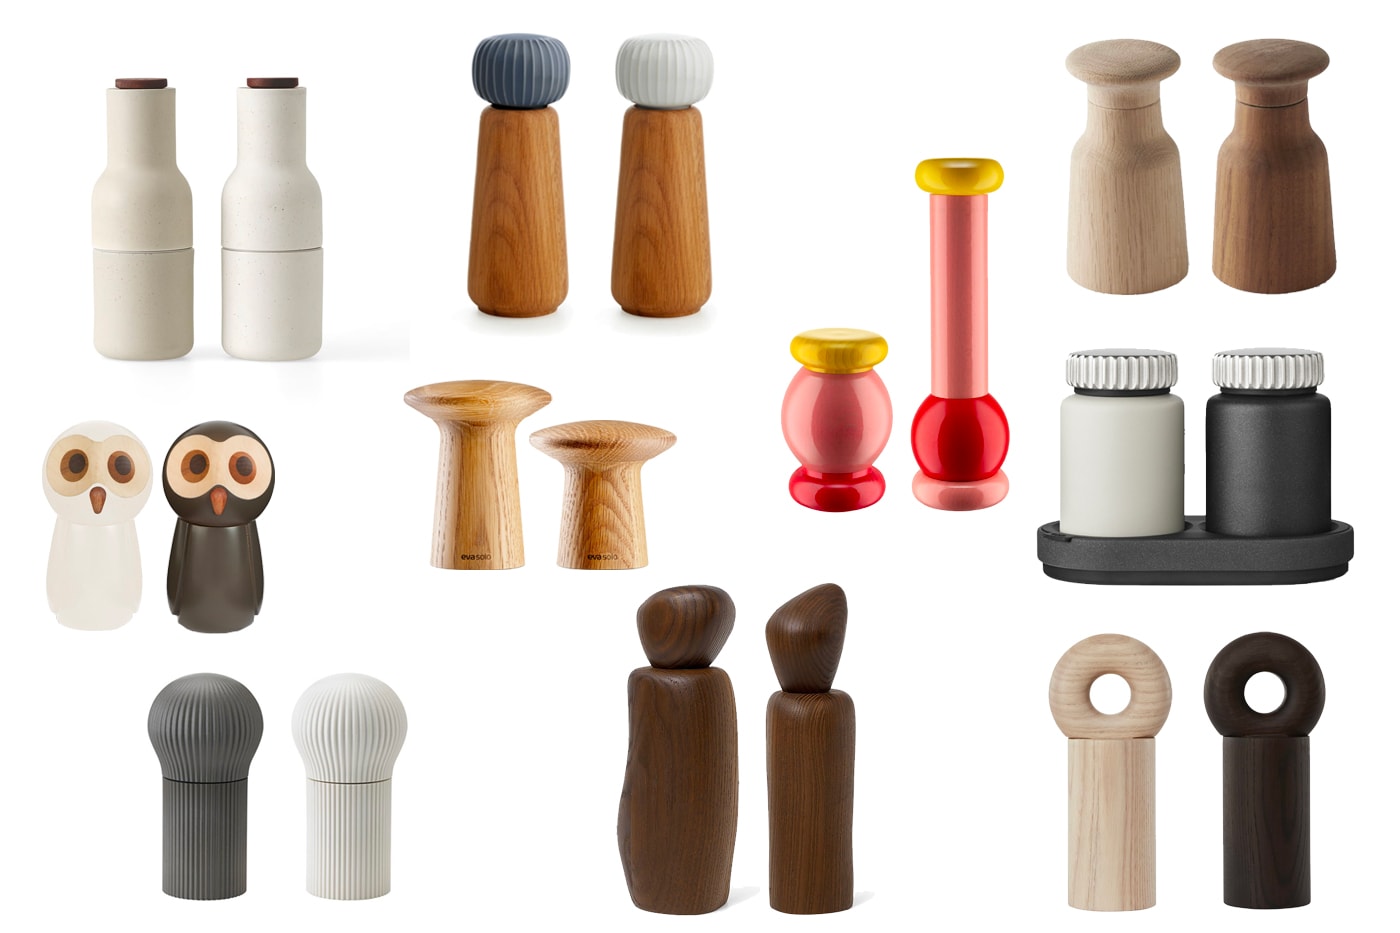 The 10 Best Salt and Pepper Shakers of 2023